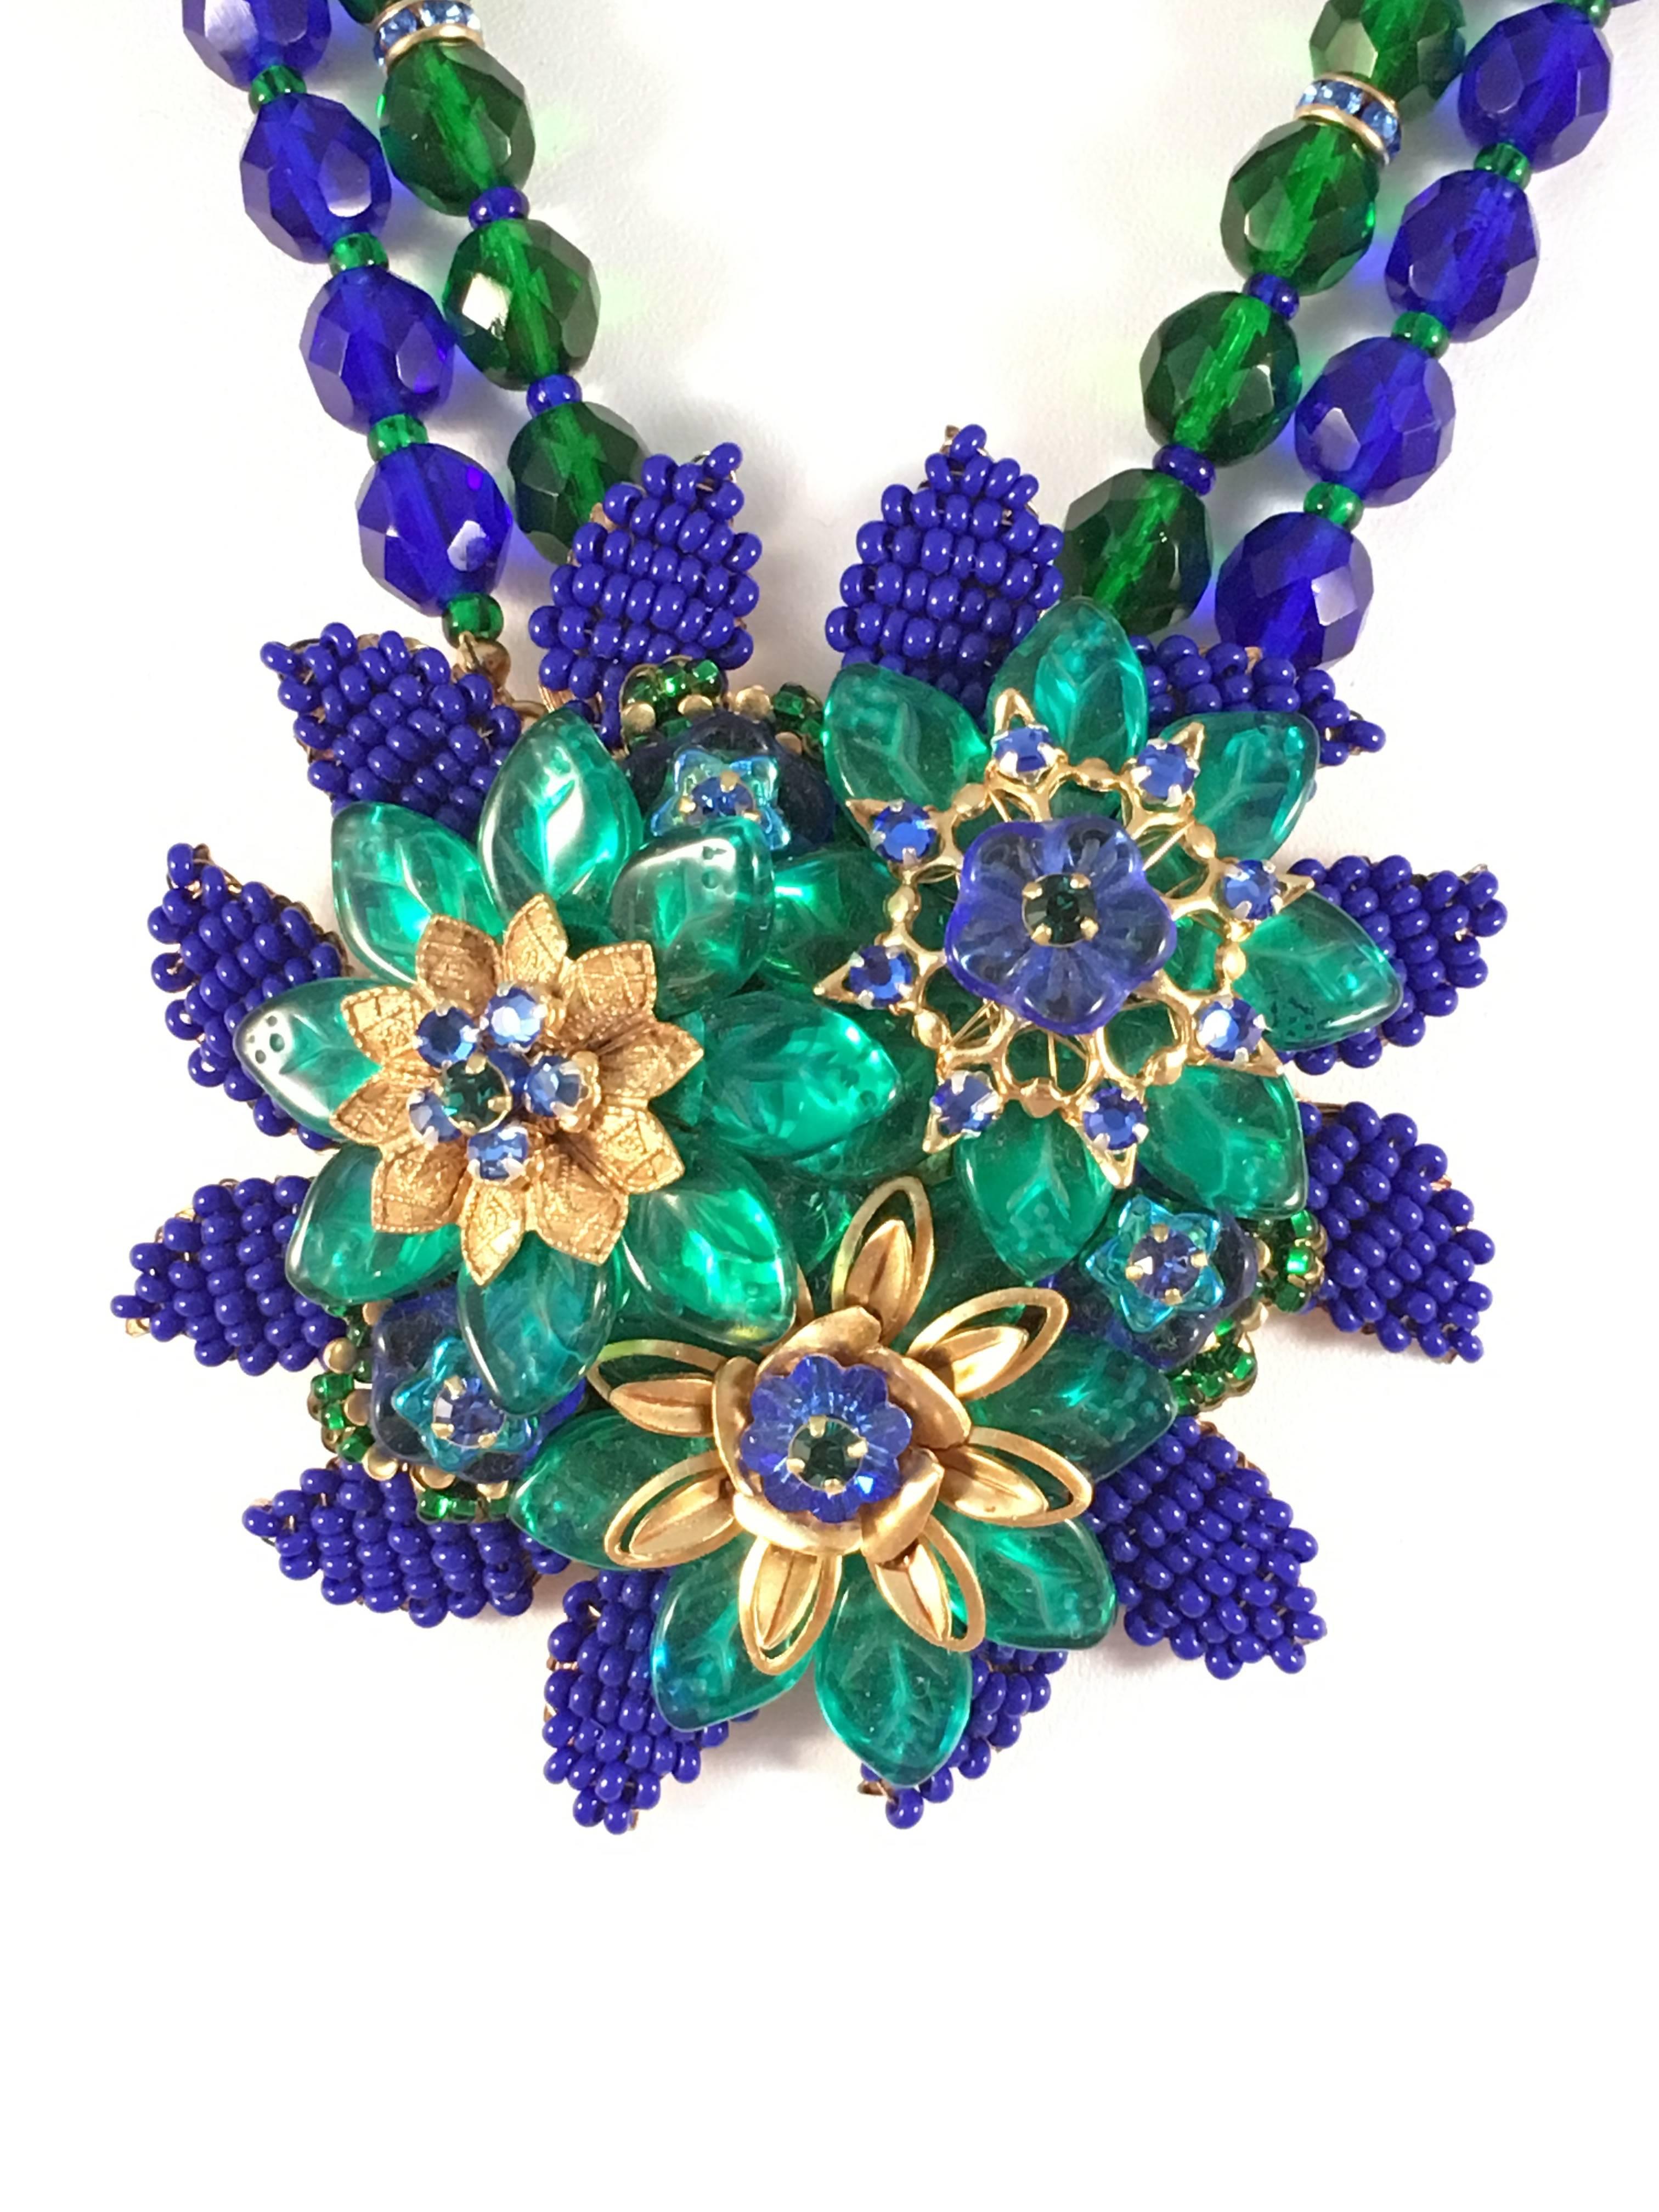 This spectacular necklace is bursting with color and detail. Its pendant is made up of all different glass beads and measures 2 5/8" in diameter. The necklace is adjustable and can be worn as an 18 1/2" necklace up to 21". It is